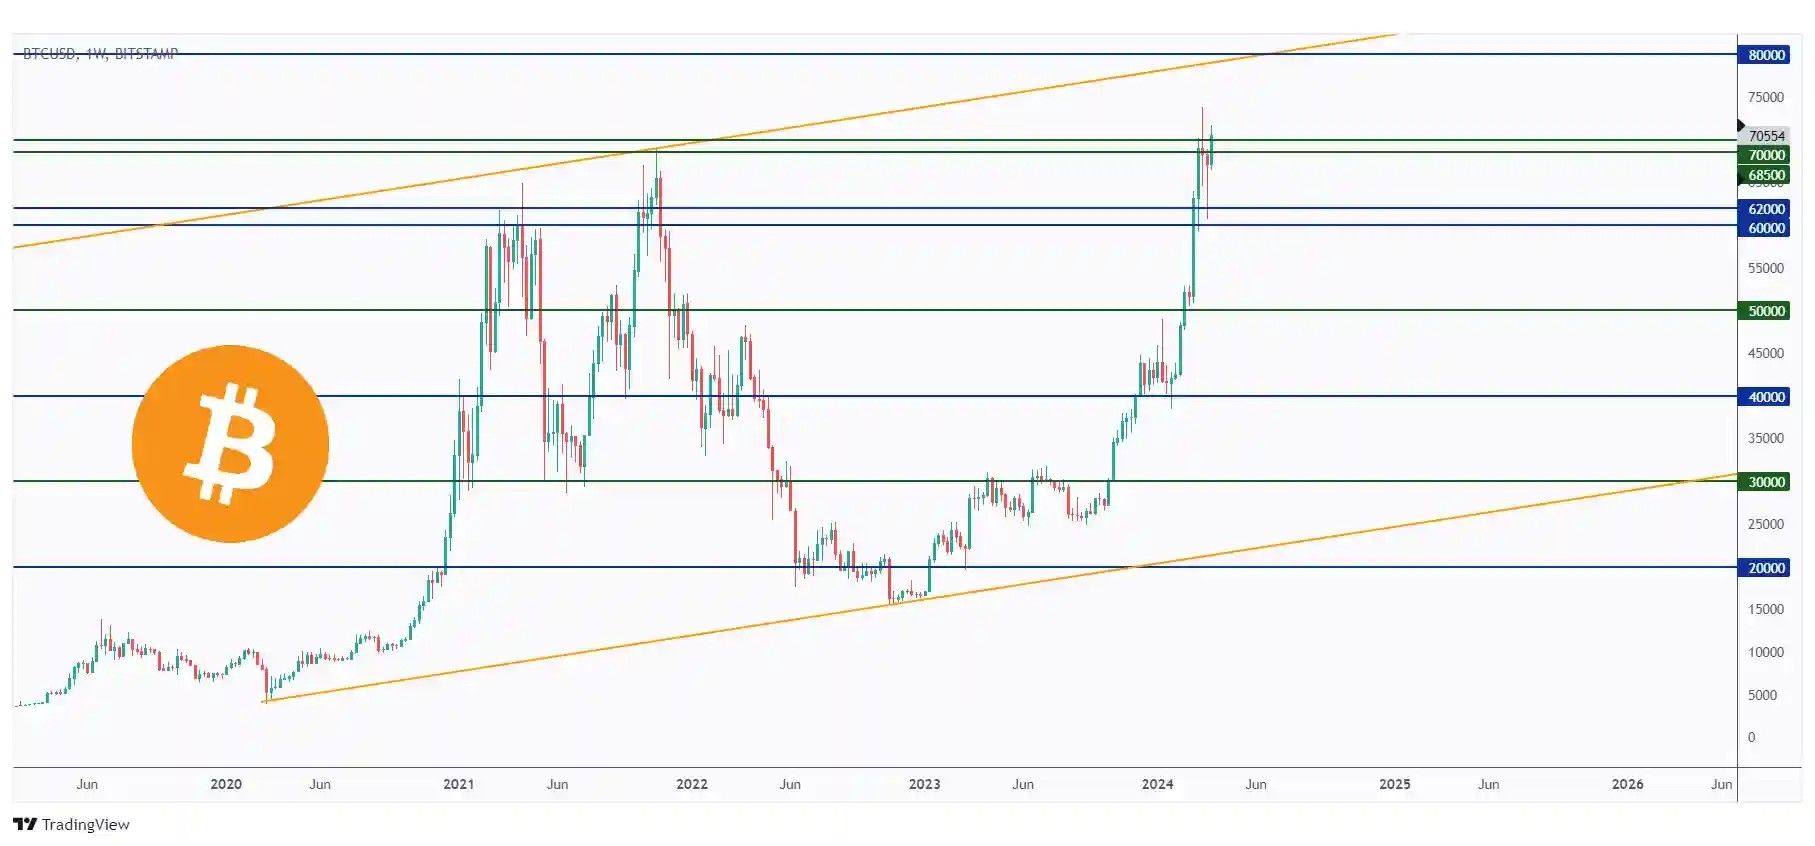 BTC weekly chart hovering around the $70,000 resistance.